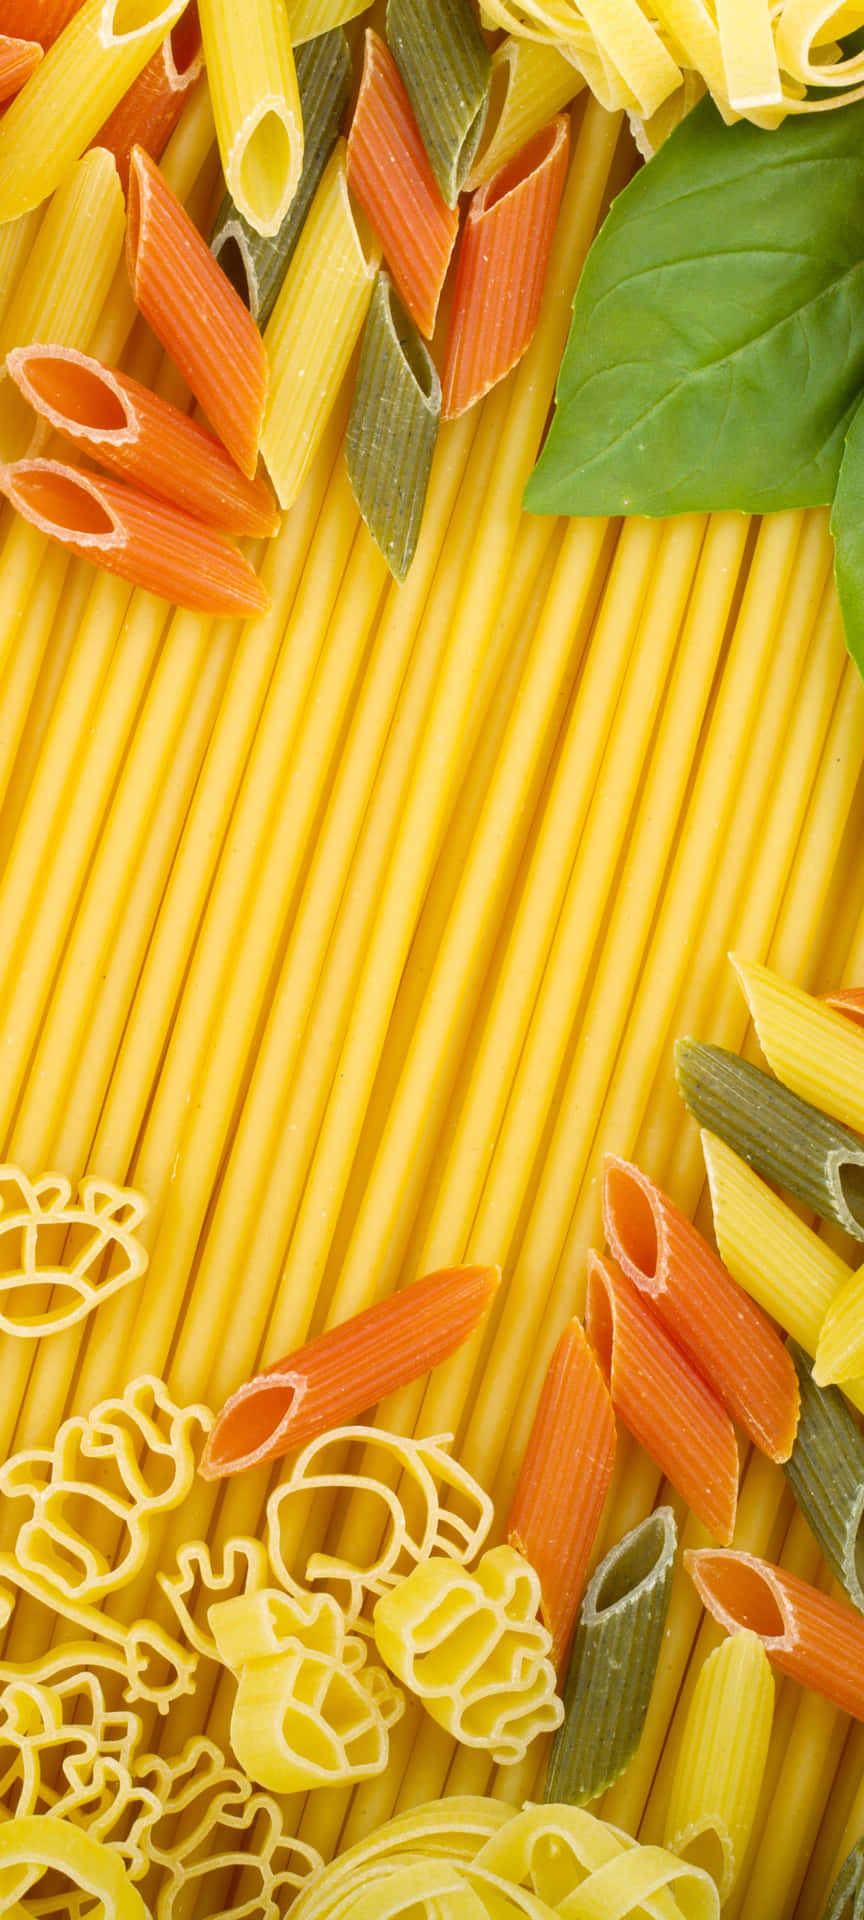 Android Pasta Background Various Uncooked Pasta